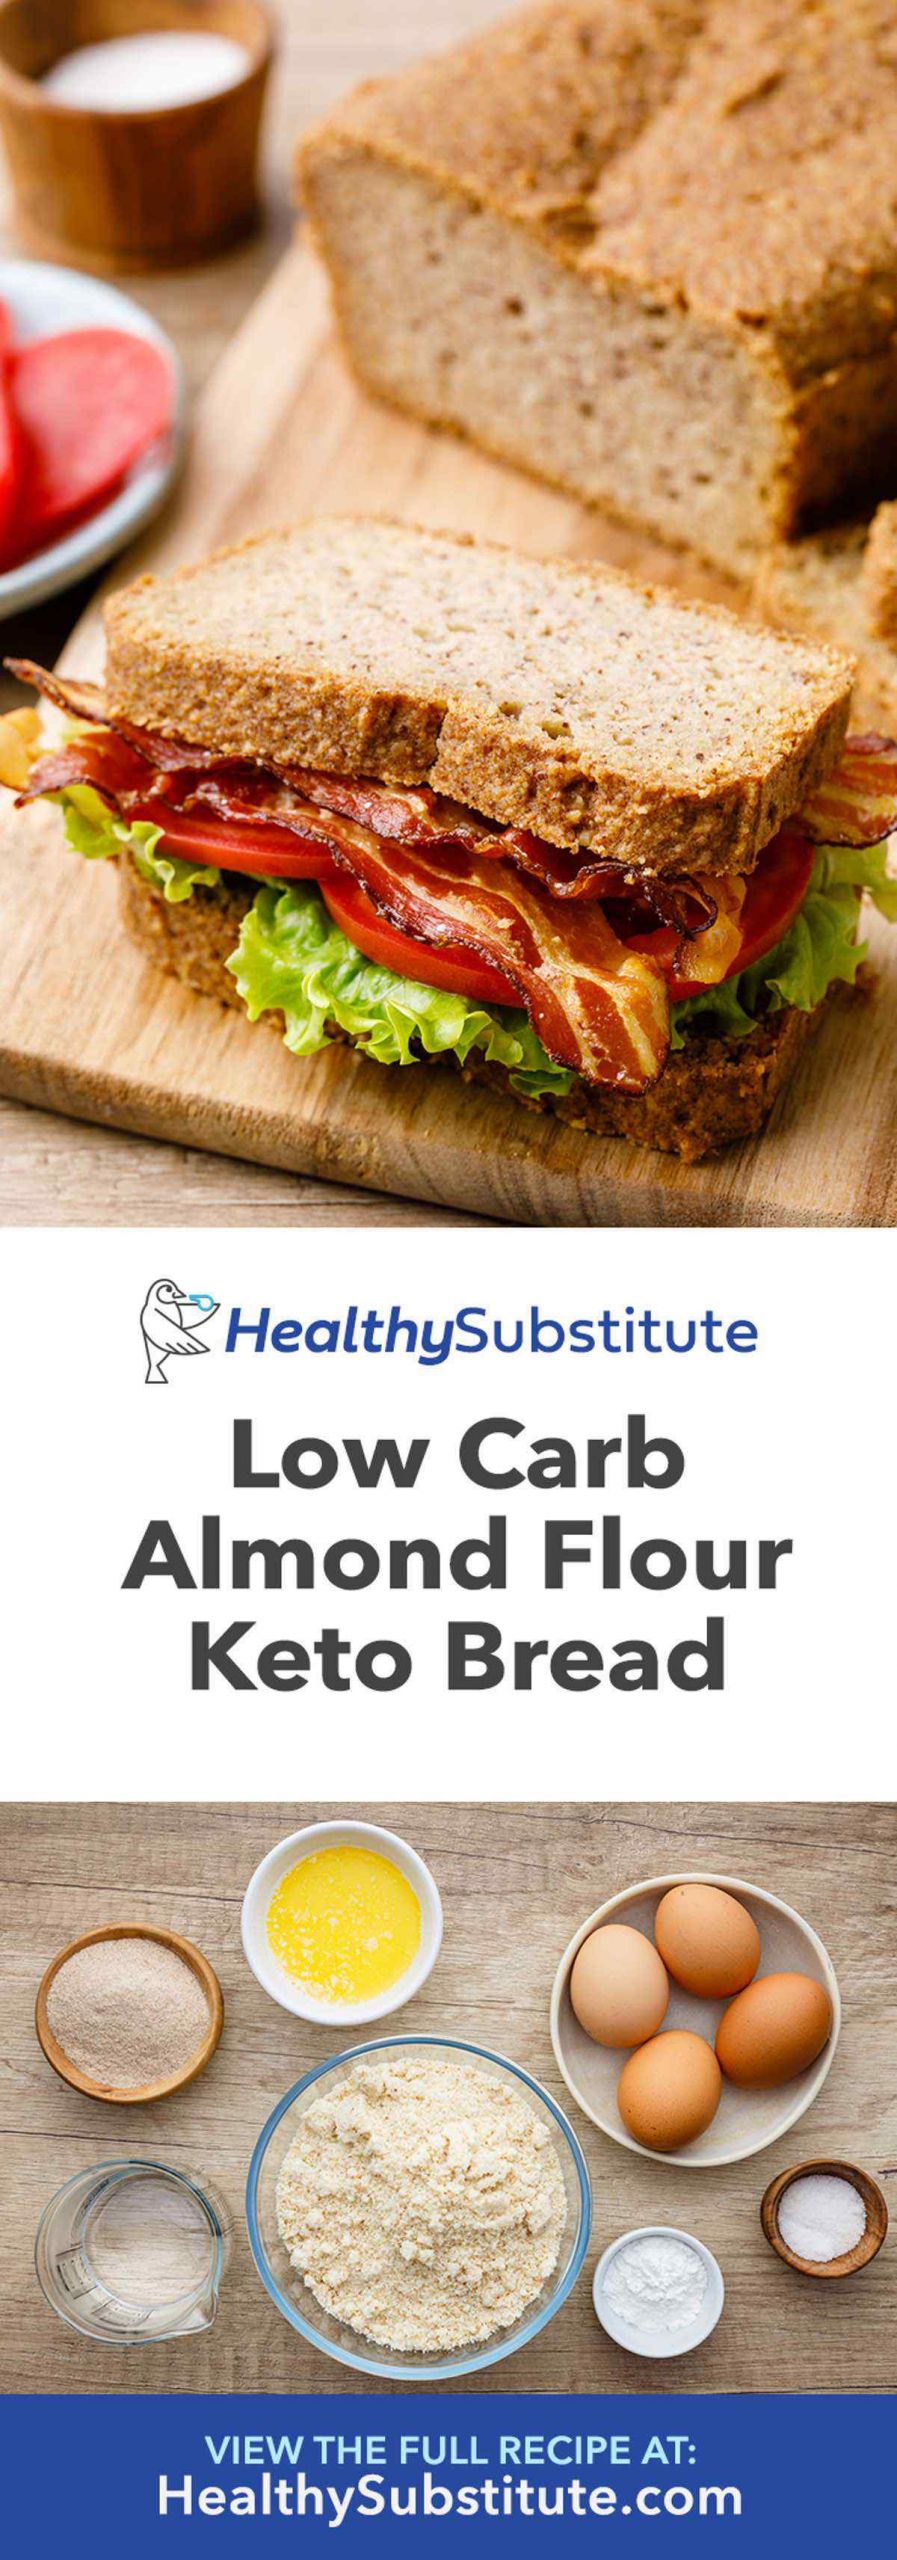 Simple Keto Bread Almond Flour
 Life changing Almond Flour Bread Recipe Keto Friendly